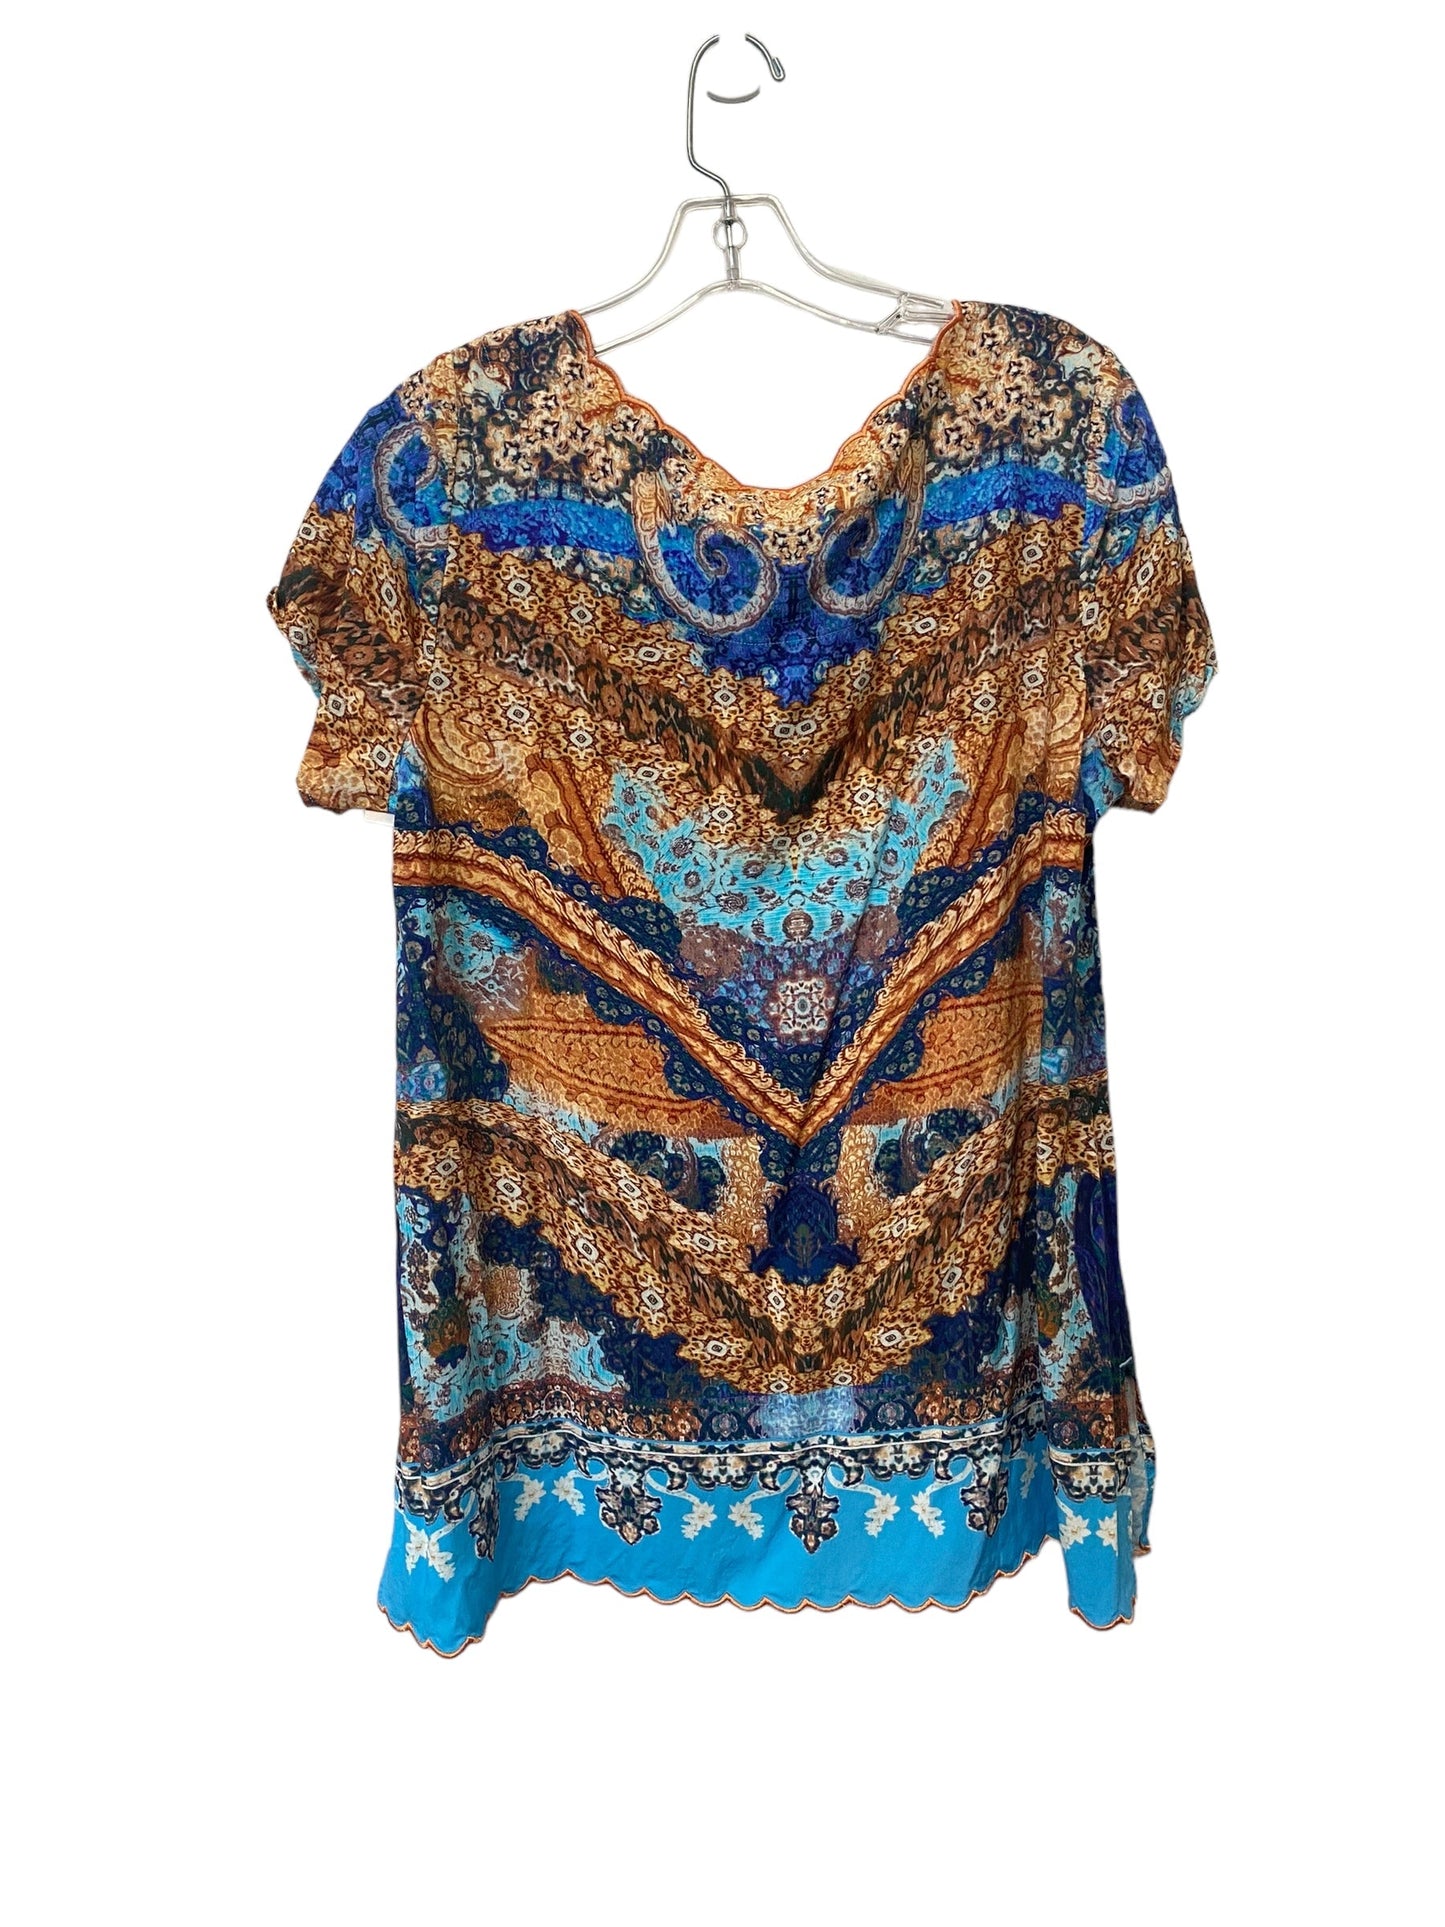 Multi-colored Top Short Sleeve Soft Surroundings, Size M